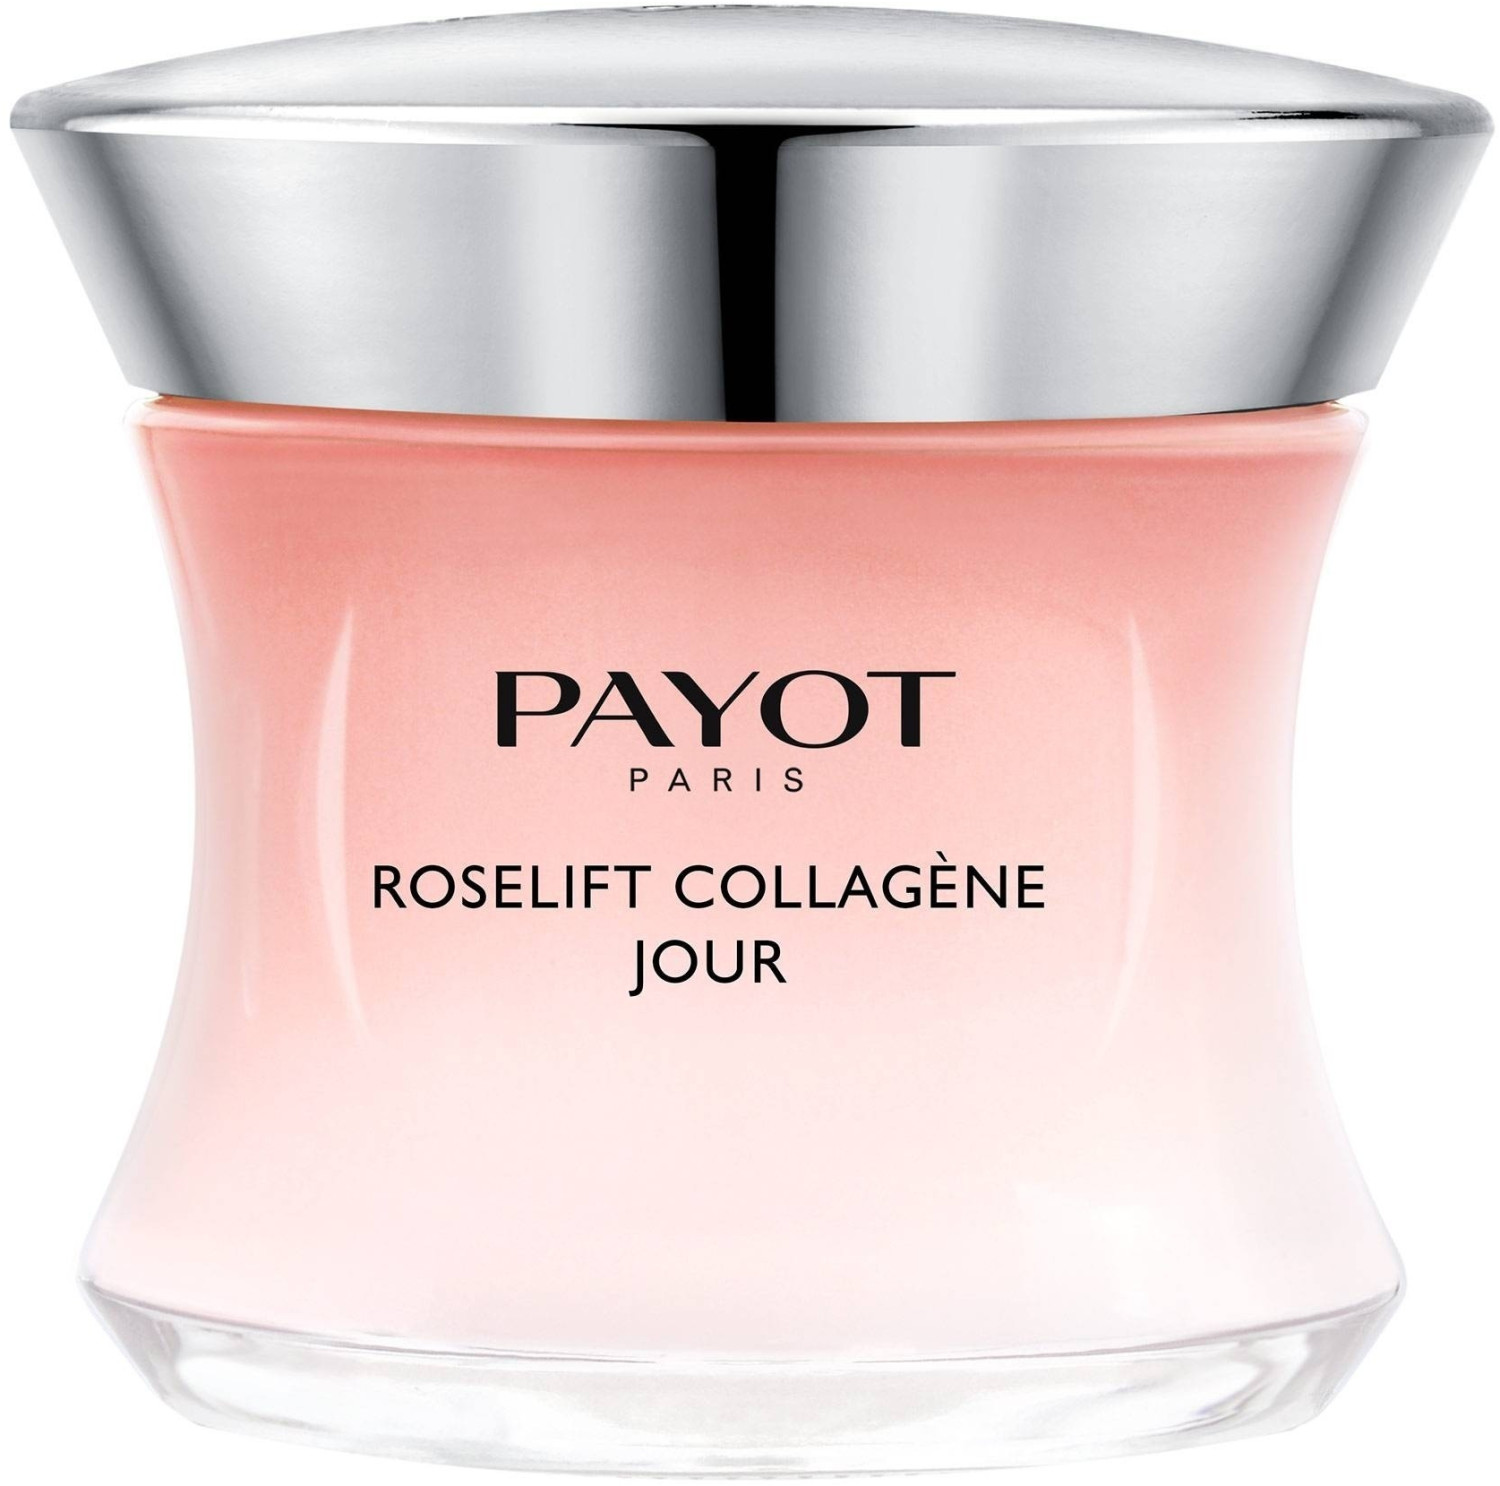 Photos - Other Cosmetics Payot Roselift Collagene Jour Lifting Cream  (50ml)